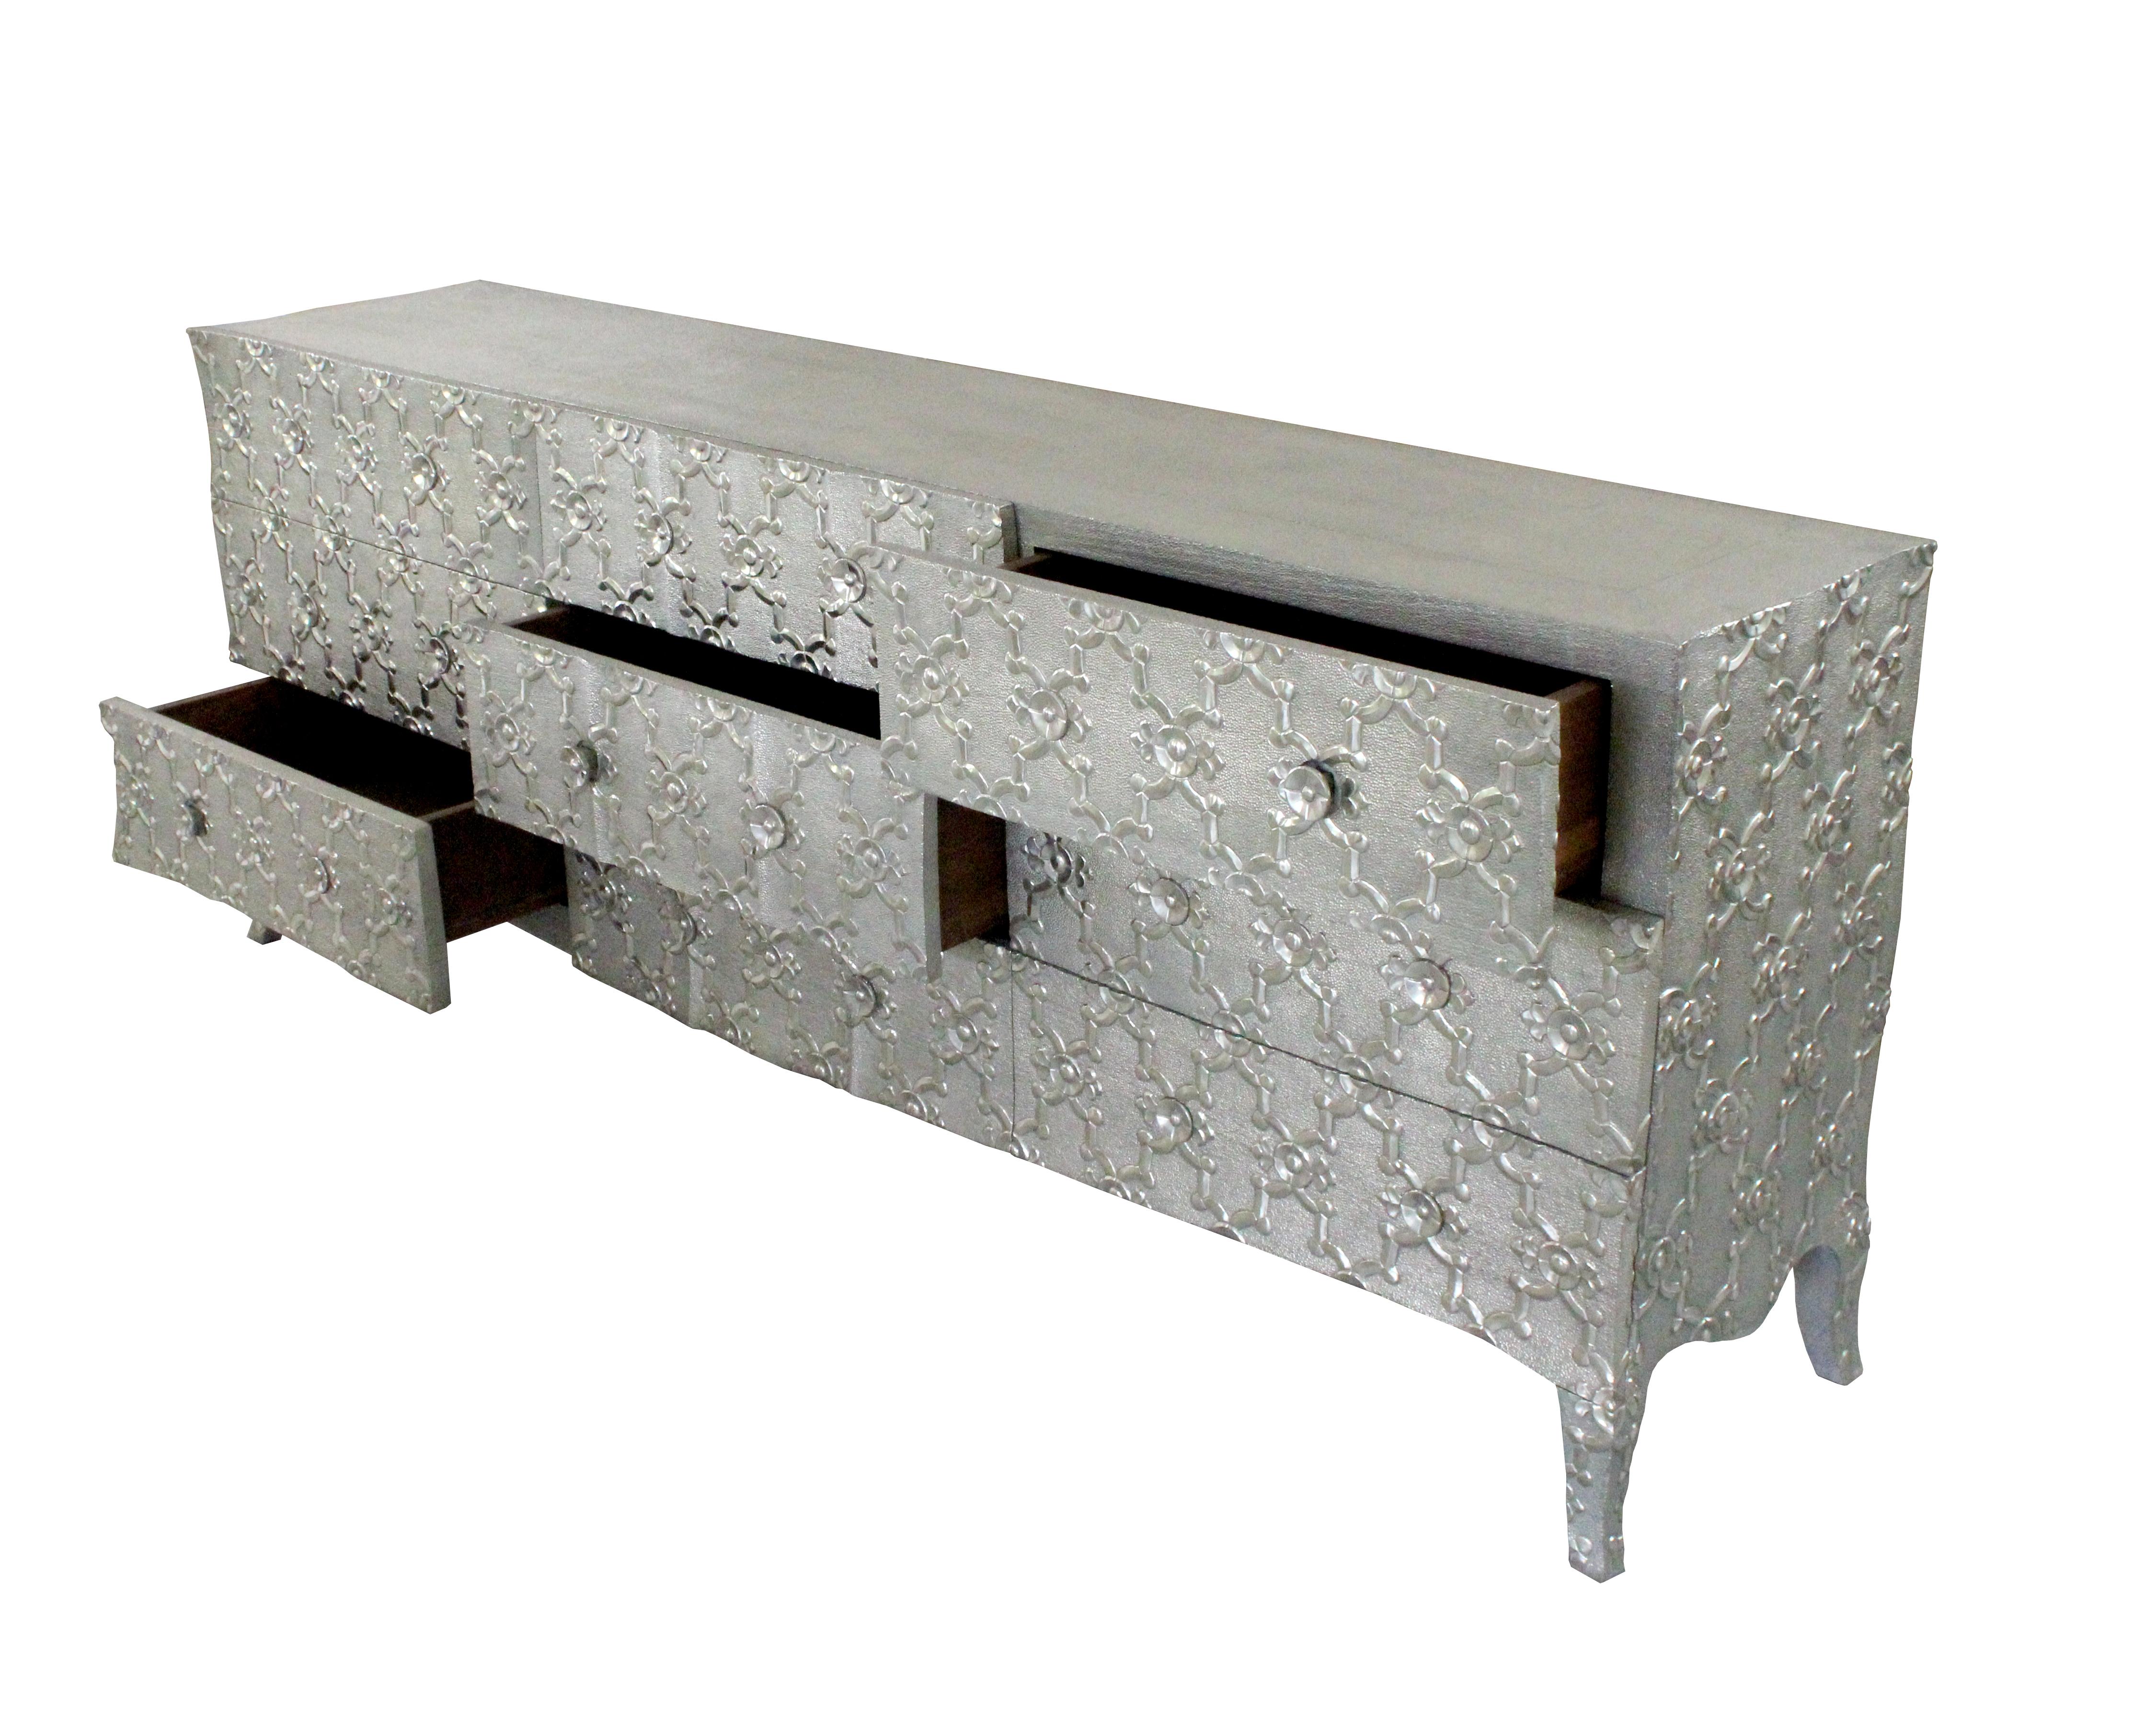 Renowned designer Paul Mathieu created this large dresser with 9 drawers with his interpretation of fleur-de-lis motif carved all-over the piece just like the other two designs namely the Louise Semainier and Demi Louise Semainier which are part of